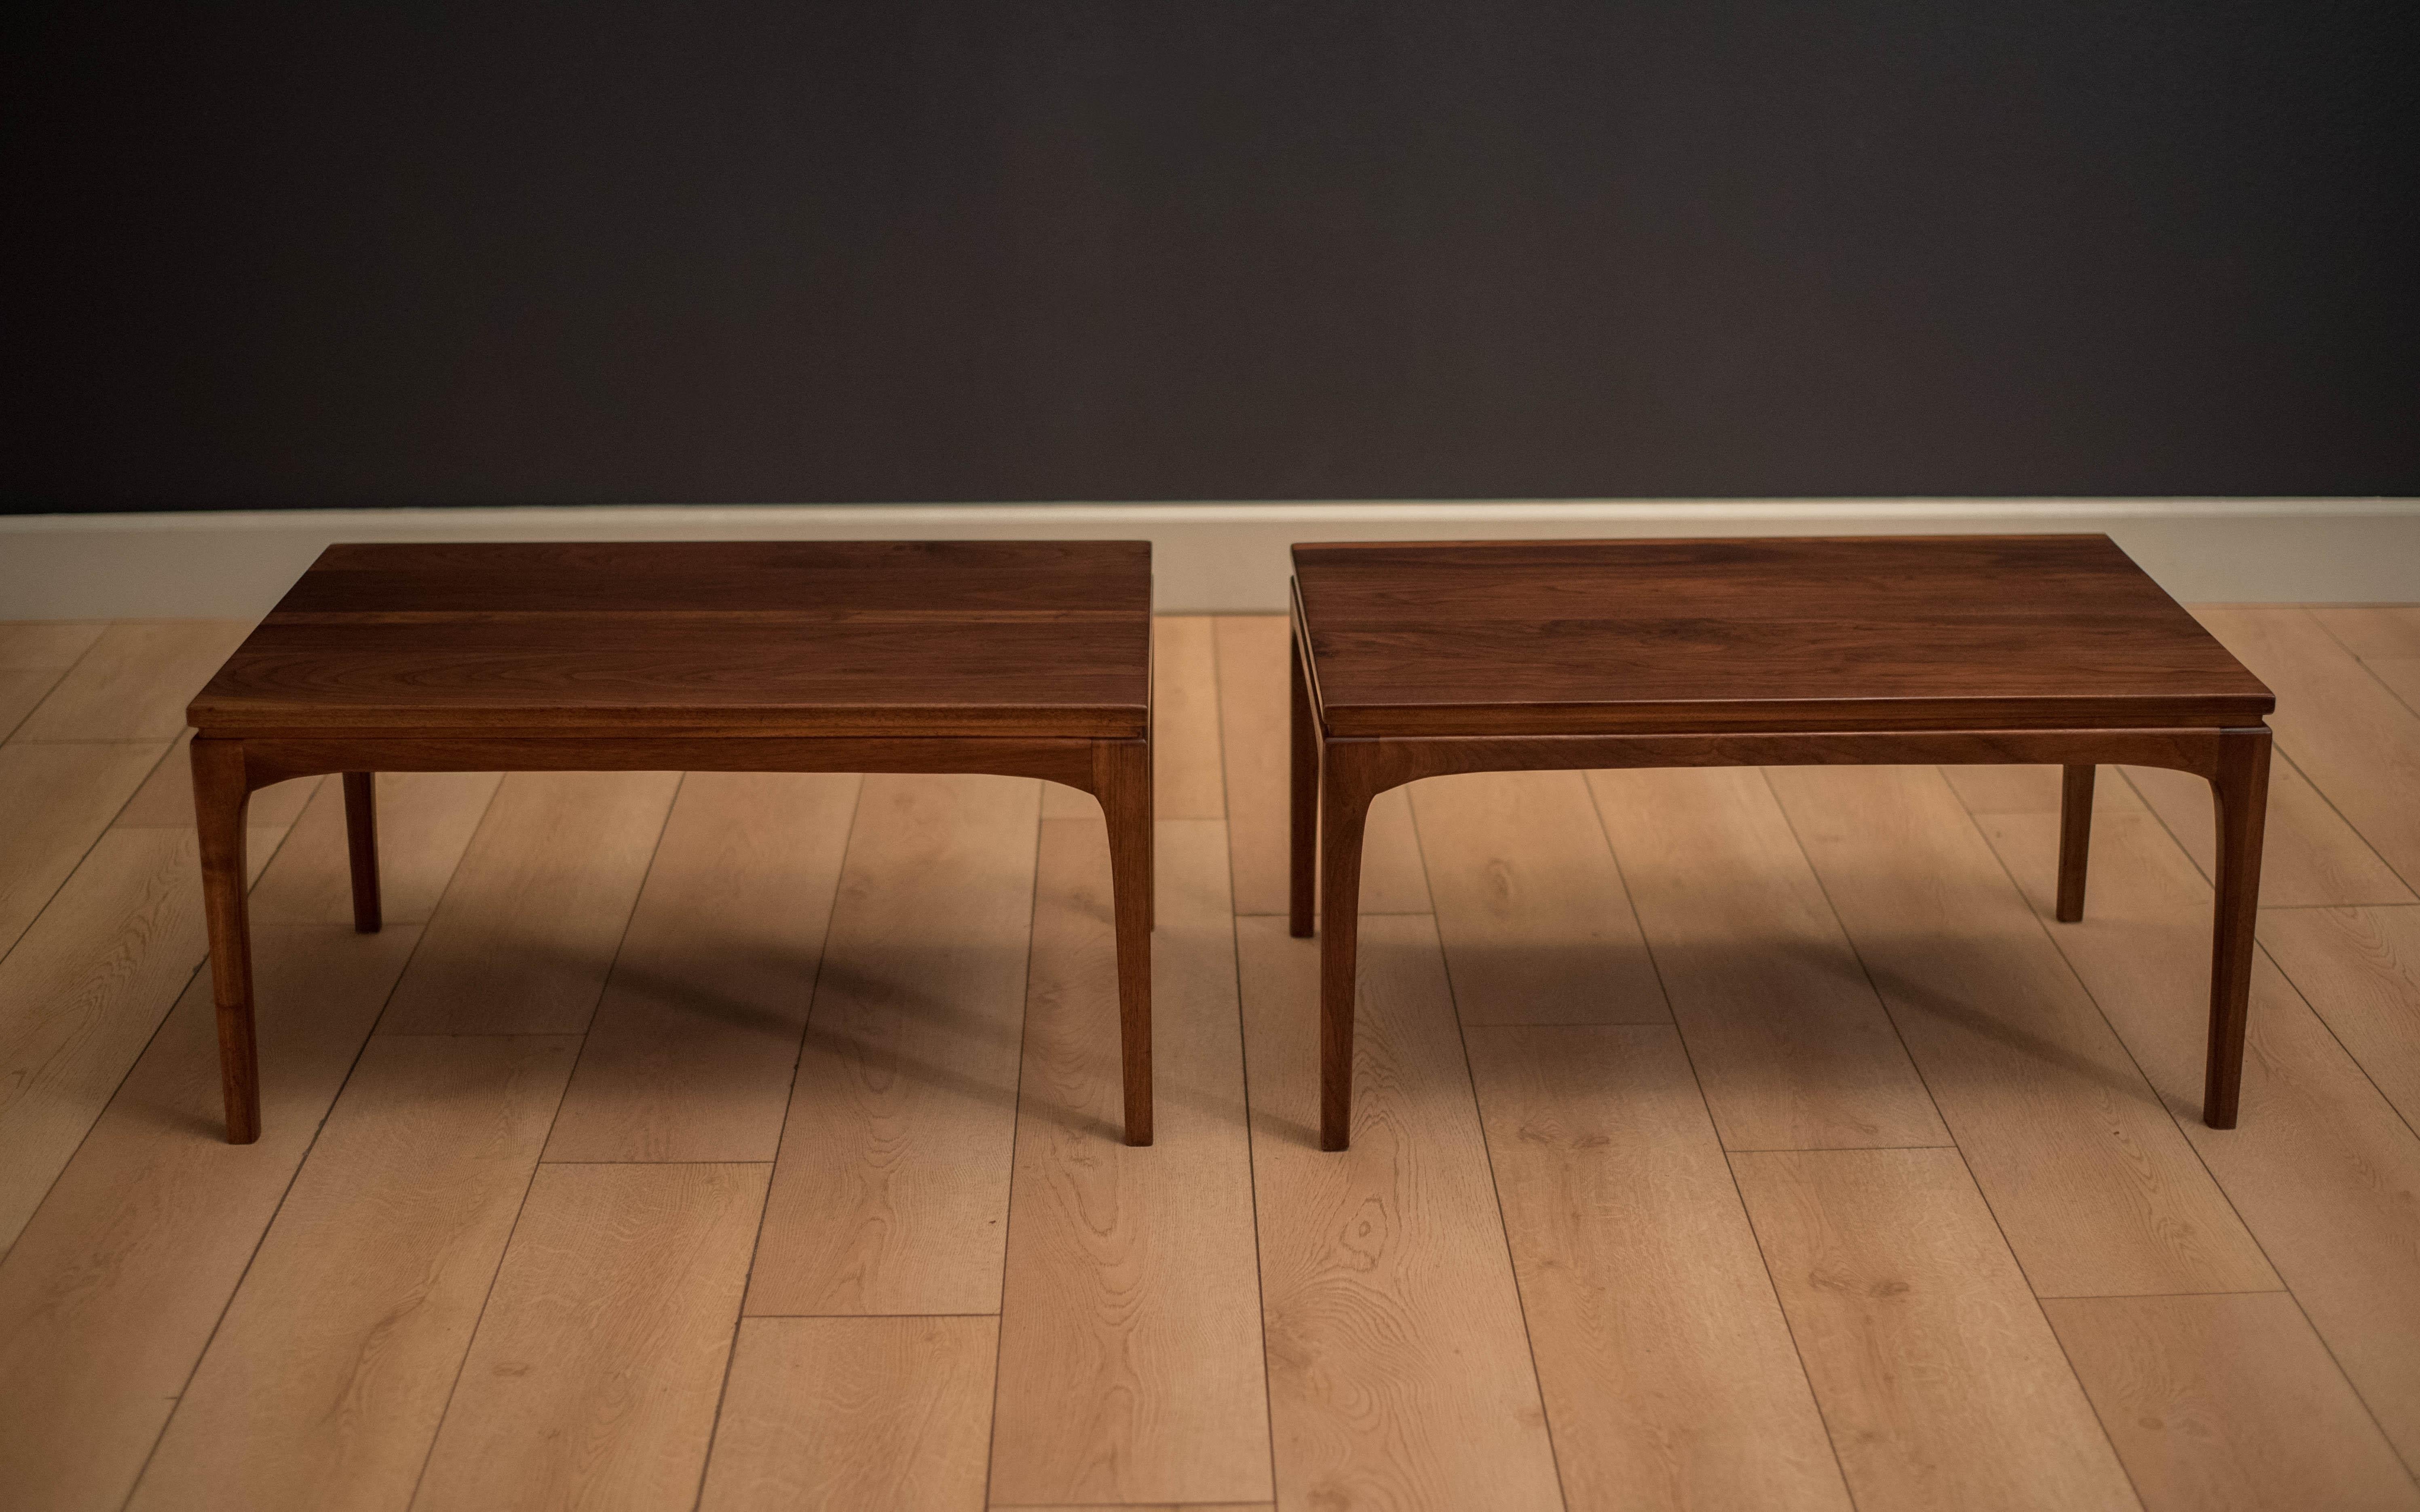 Mid-Century Modern pair of side tables by ACE-HI of California. This set features a solid planked walnut rectangular top with tapered legs. Matching coffee table also available in separate listing.